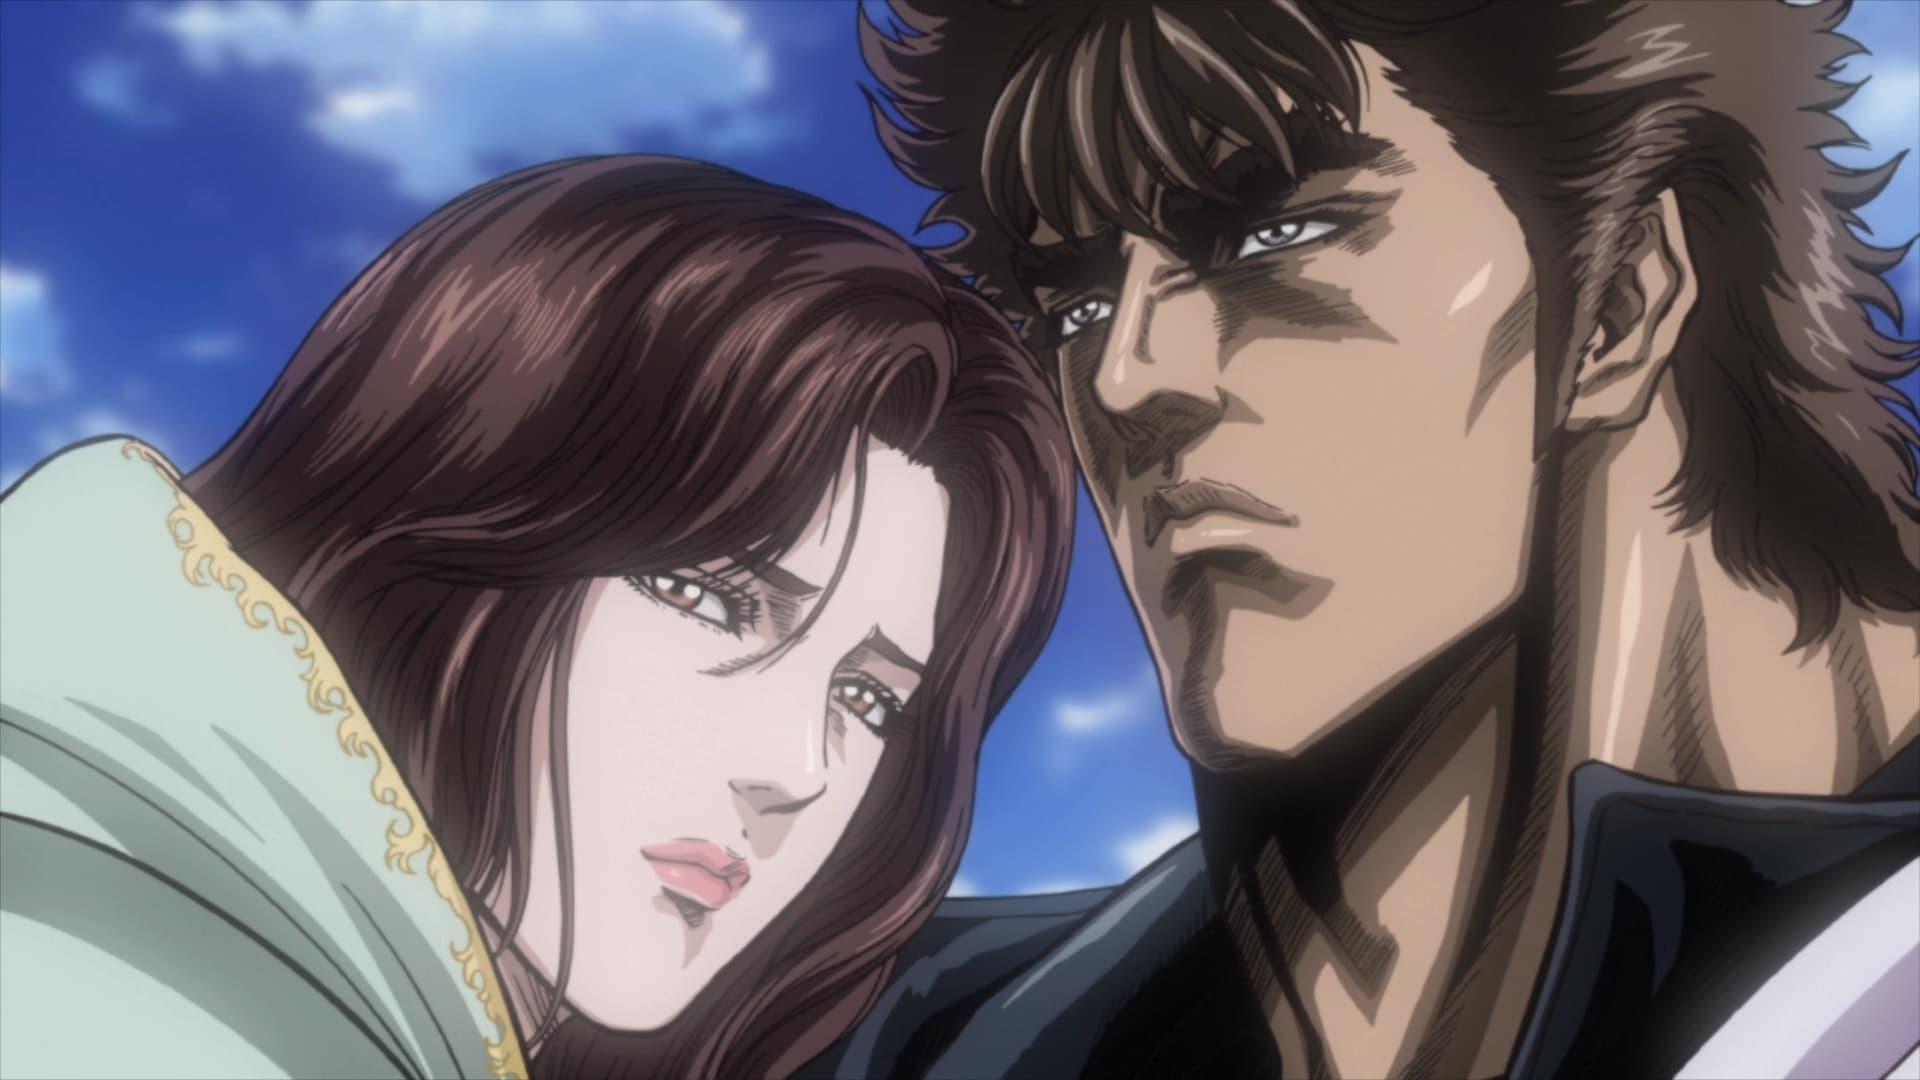 Fist of the North Star: The Legend of Kenshiro backdrop